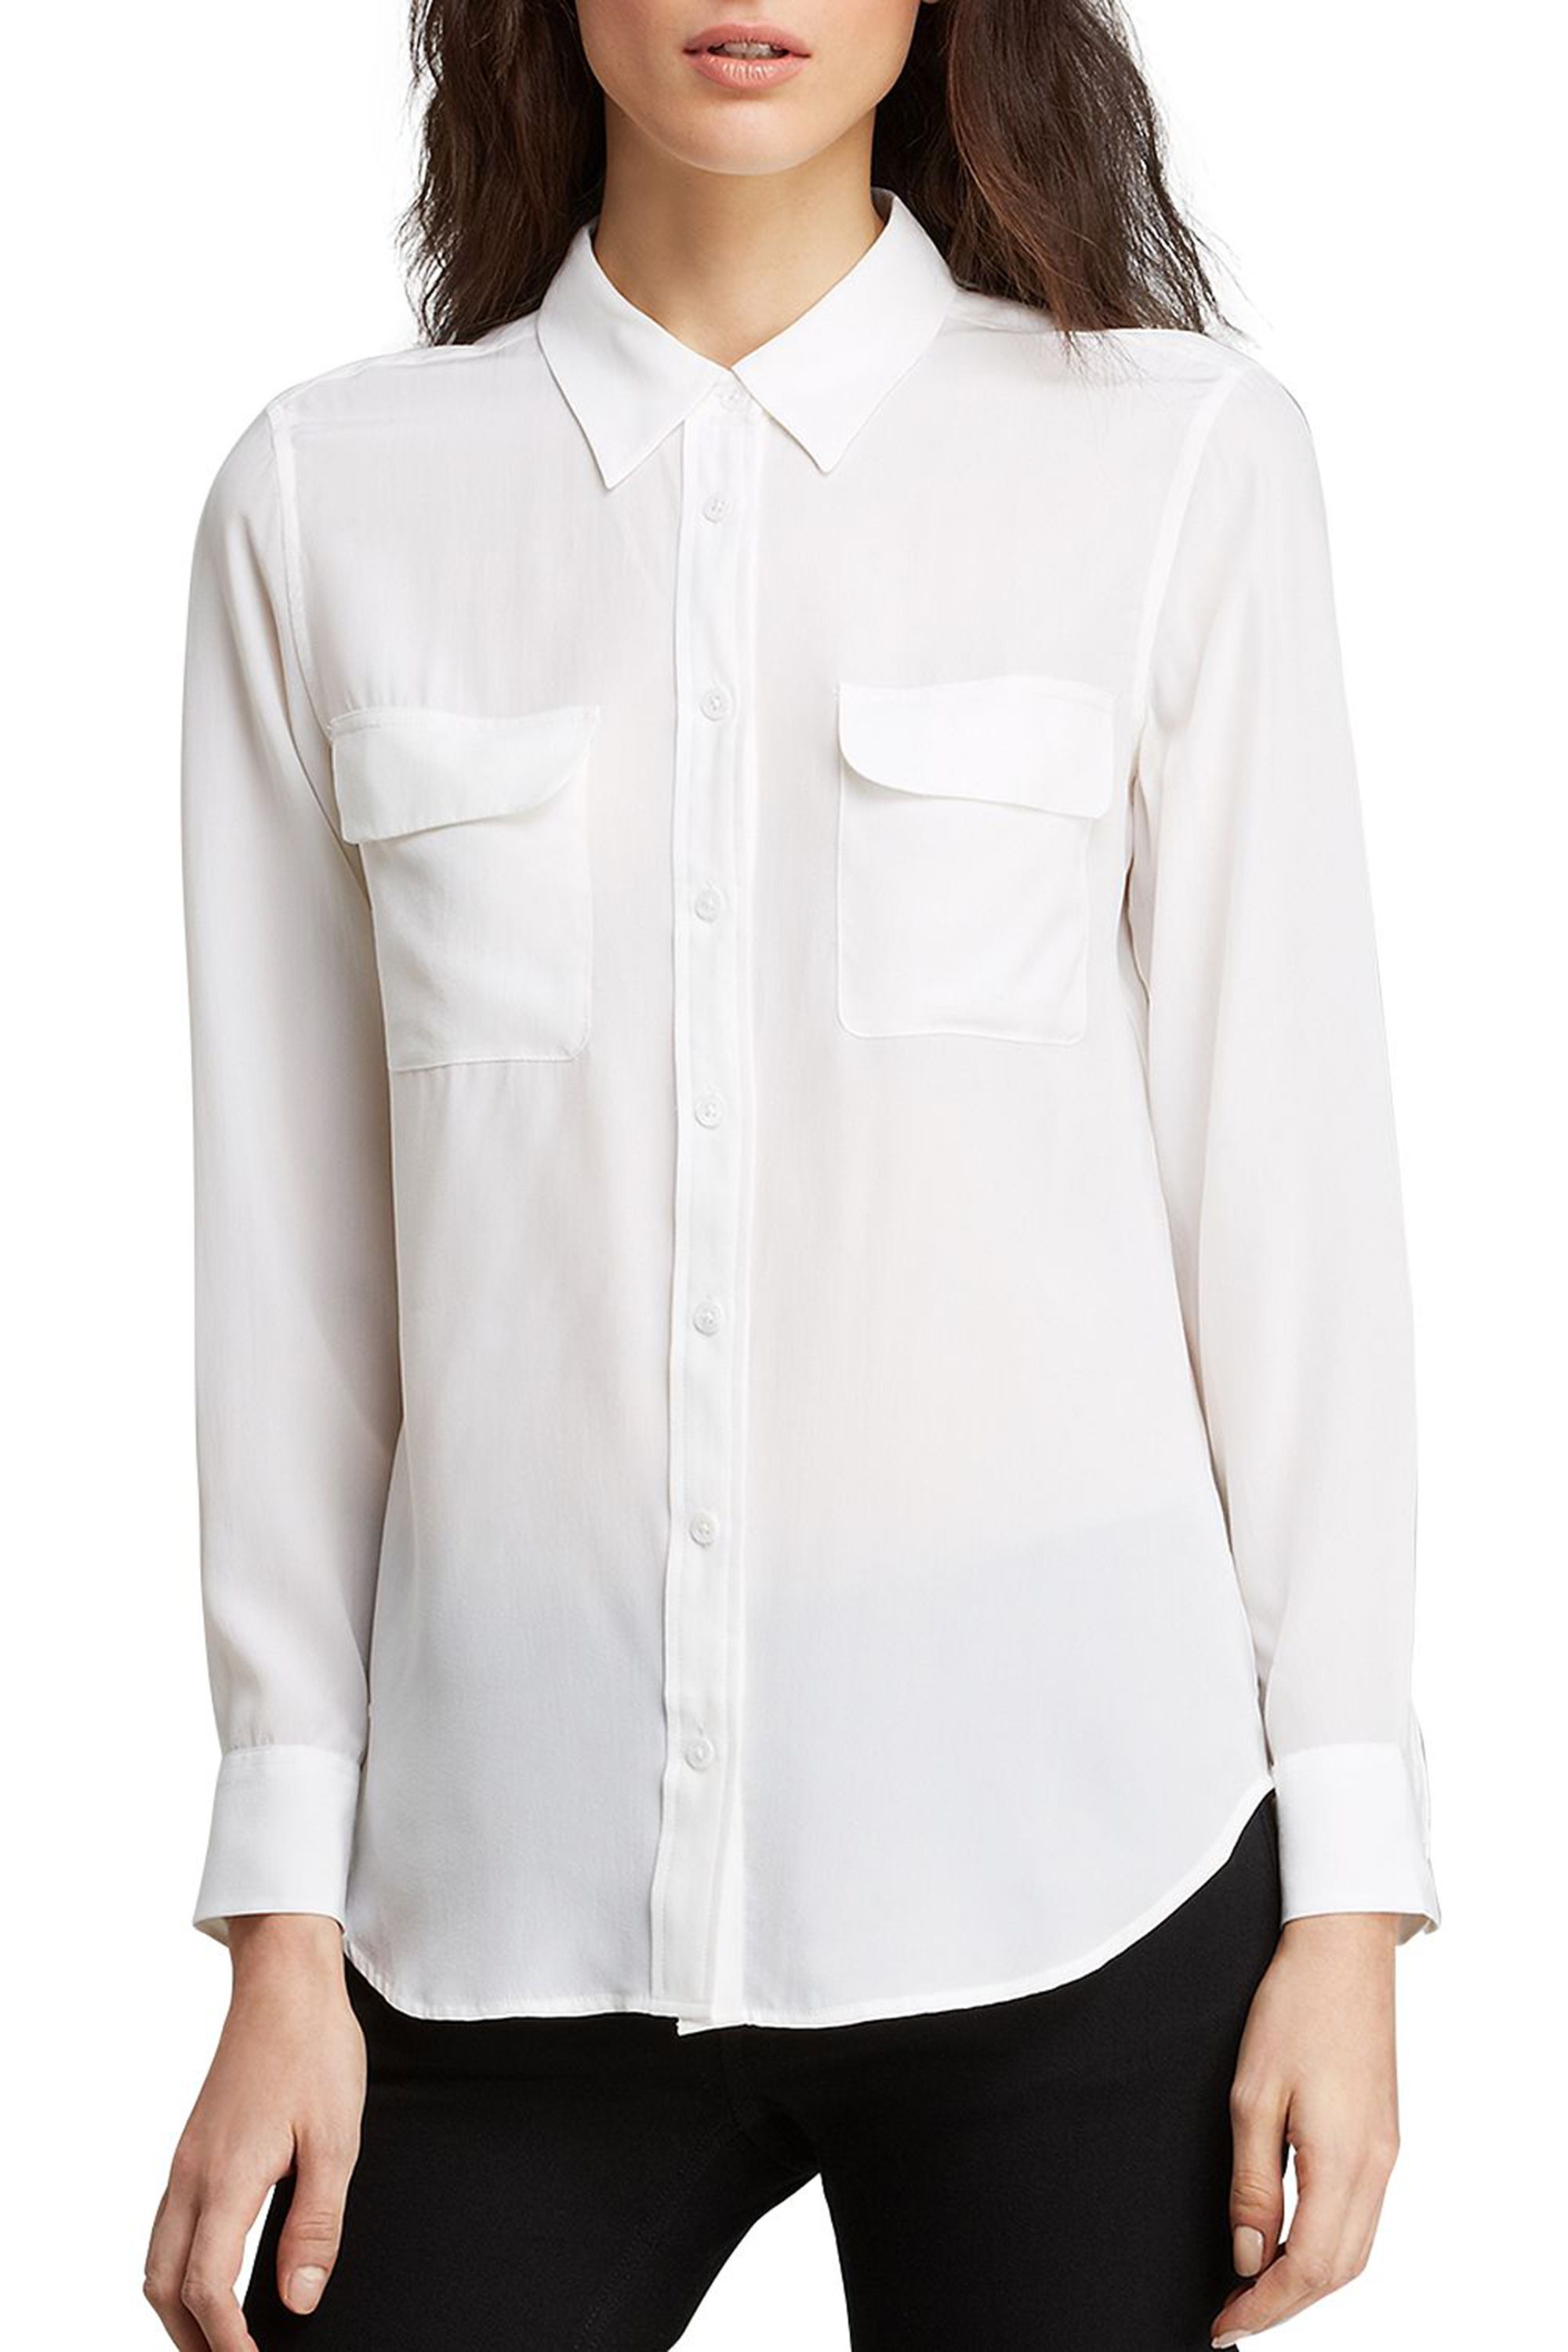 Clothing, White, Sleeve, Collar, Shirt, Neck, Blouse, Formal wear, Button, Top, 